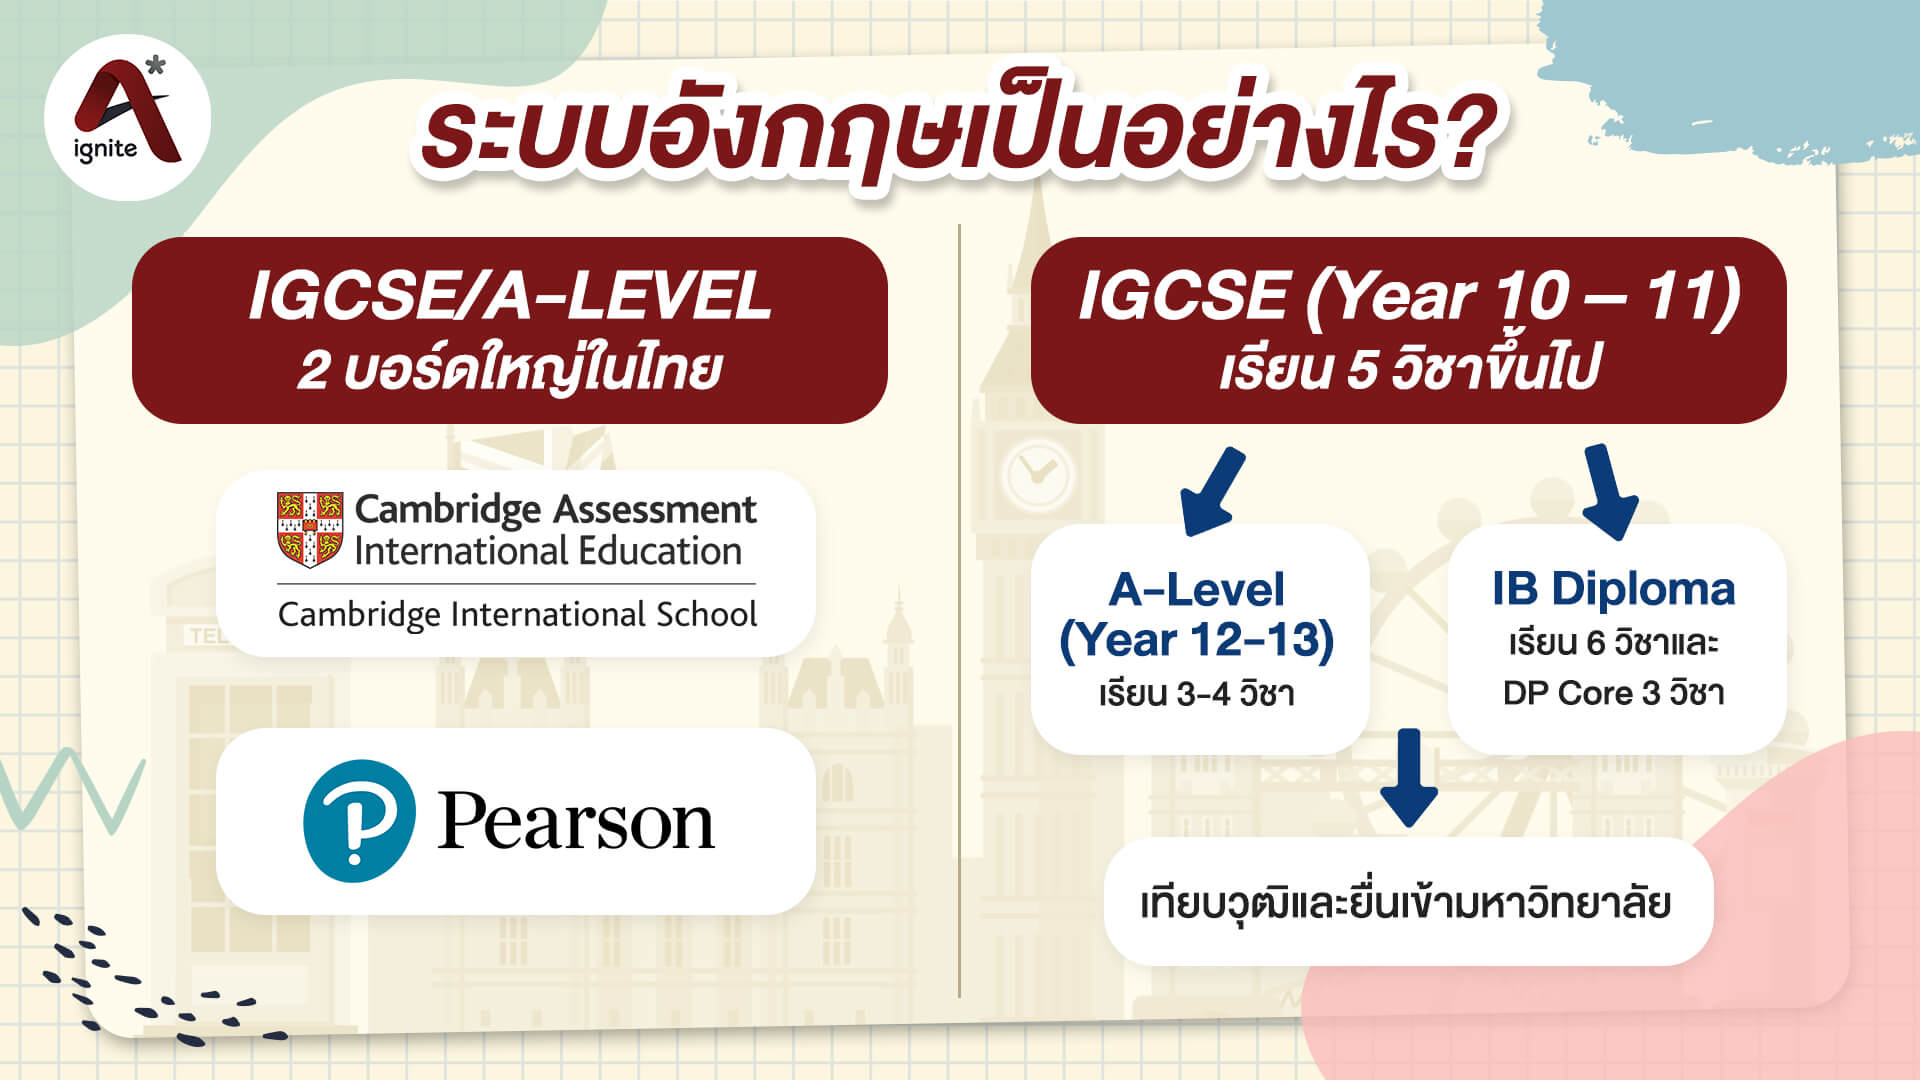 get to know IGCSE and A-level for international curriculum.